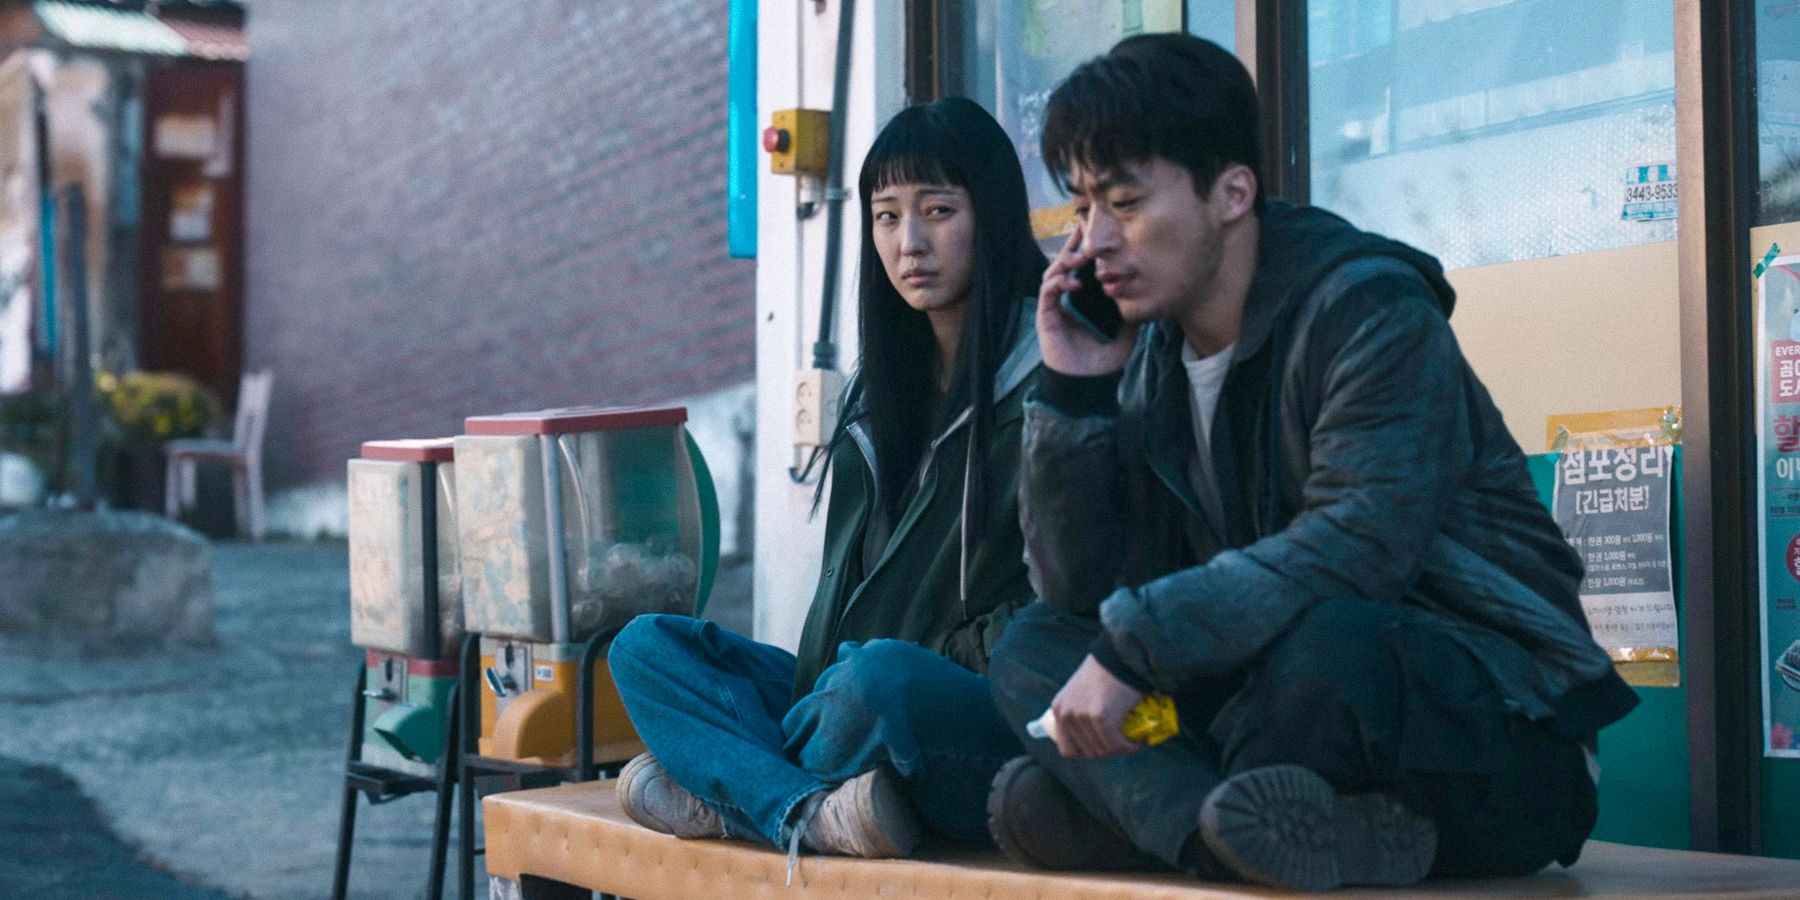 Jeong Su-in and Seol Kang-woo sitting on a bench while he talks on the phone in Parasyte: The Grey season 1 